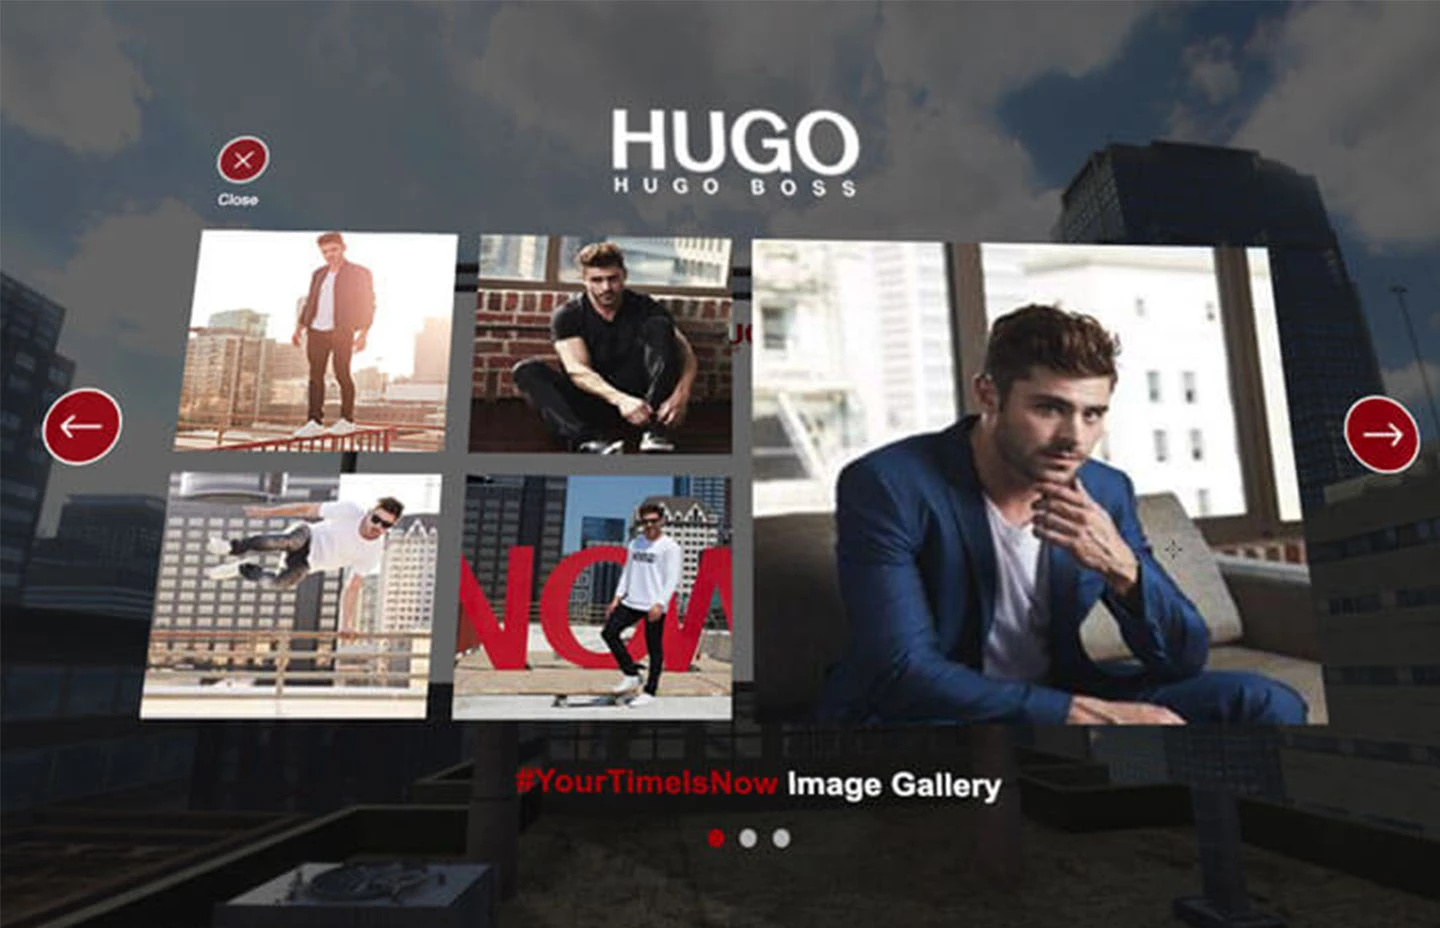 Hugo Boss image gallery with series of photos featuring Zac Efron